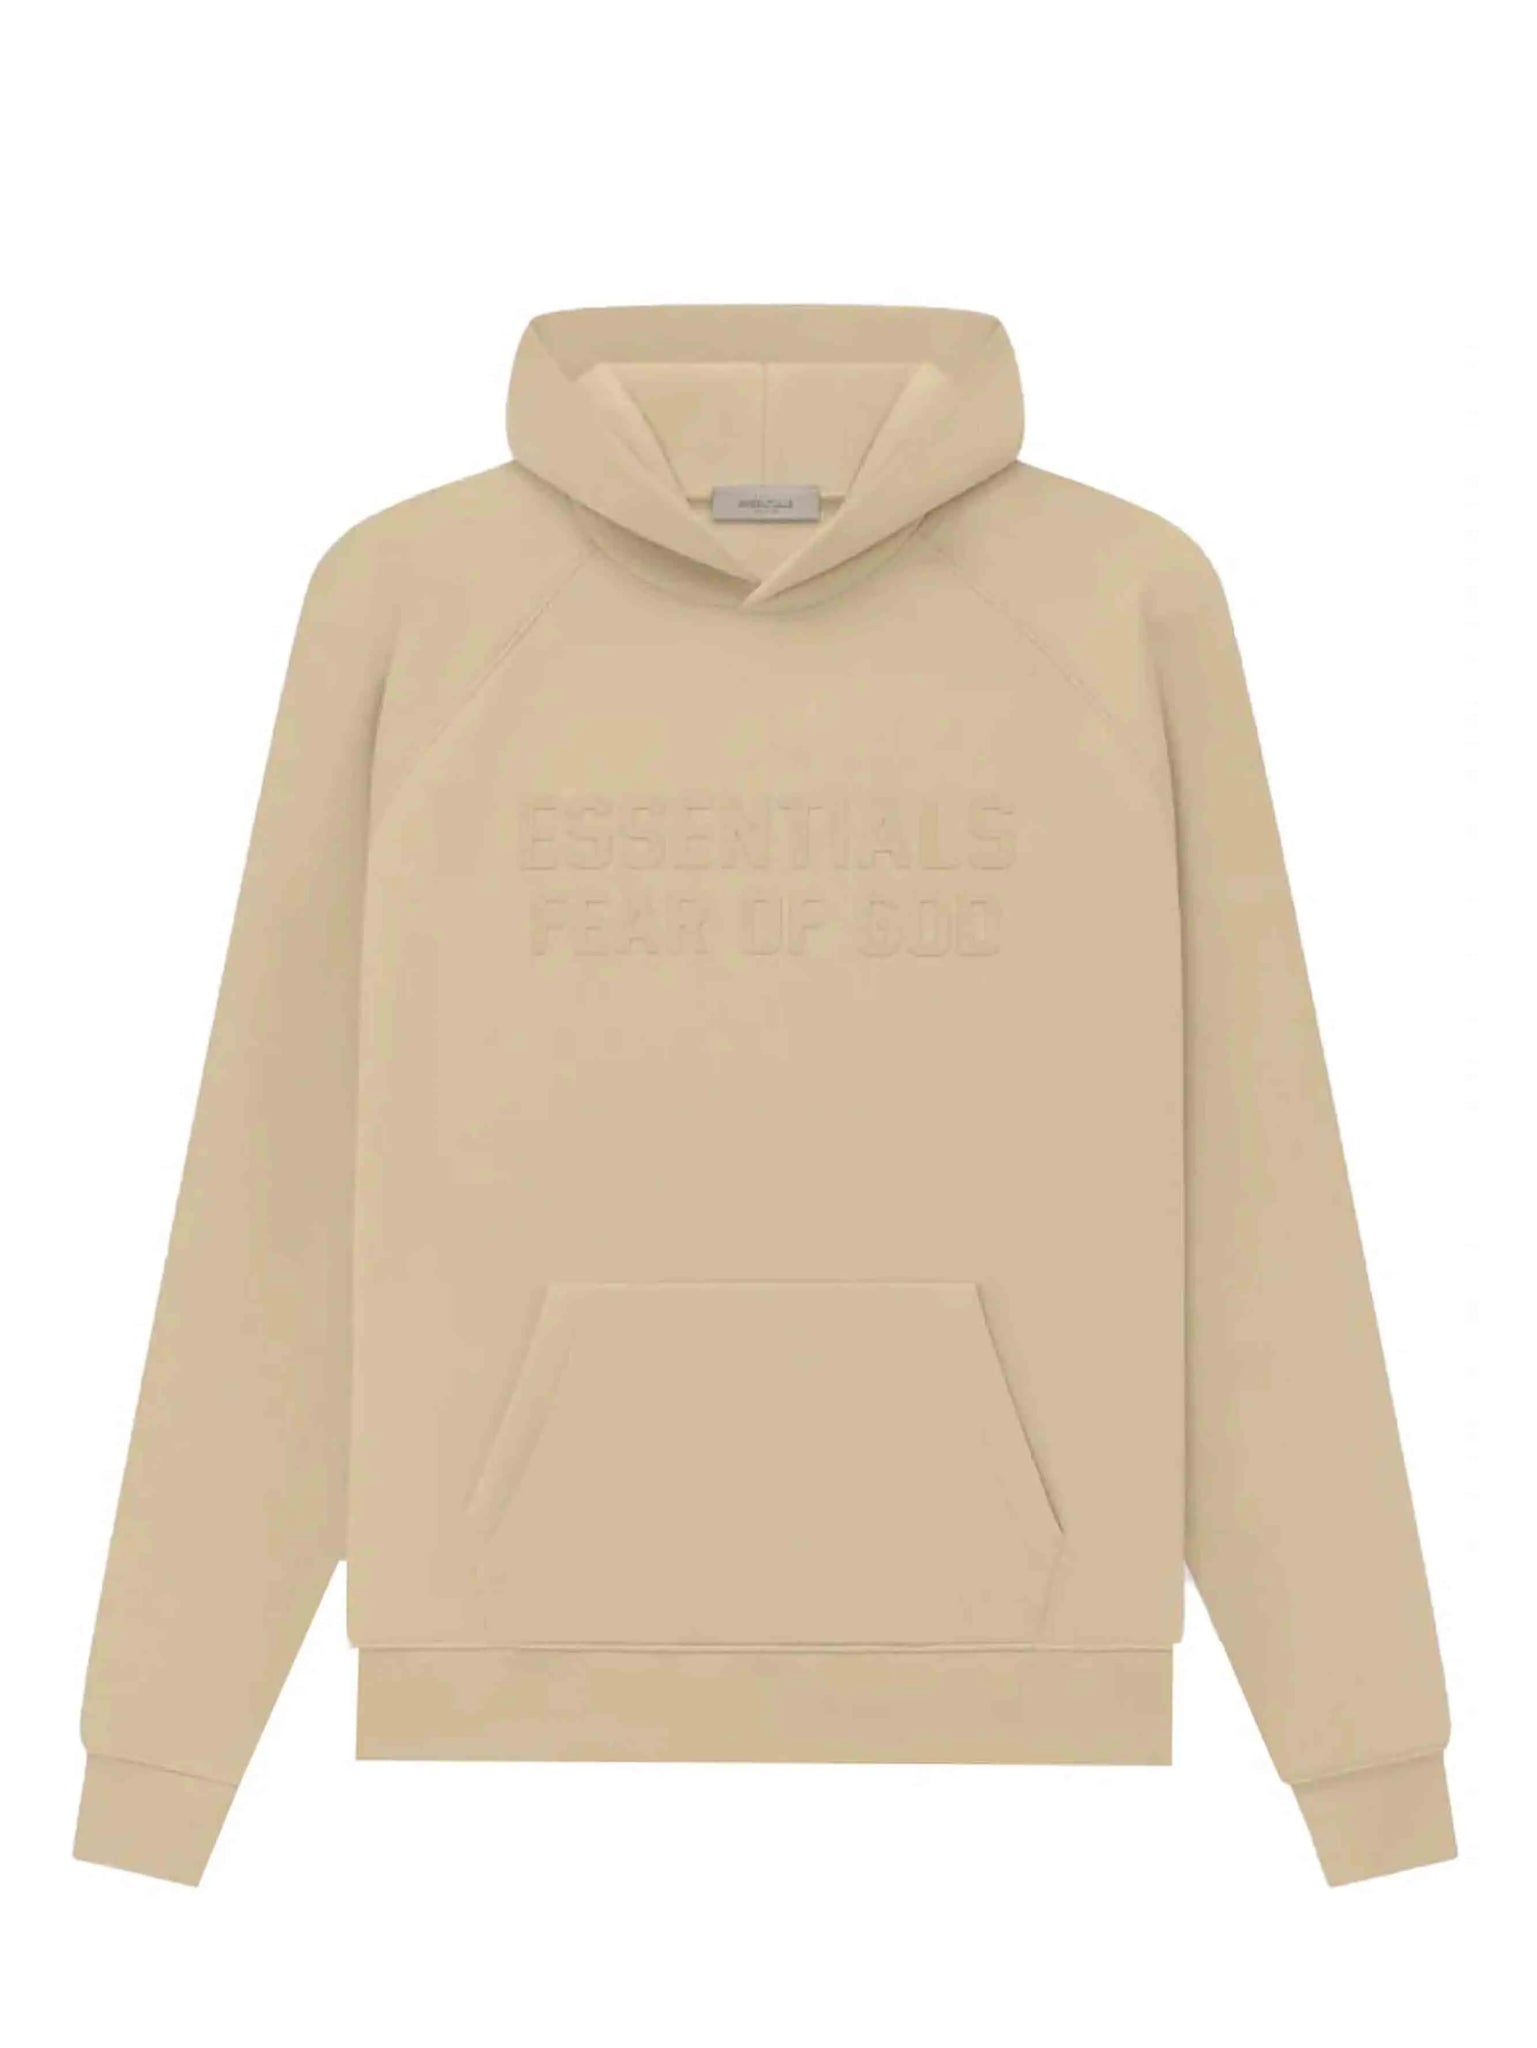 Fear of God Essentials Hoodie Sand (SS23) Prior